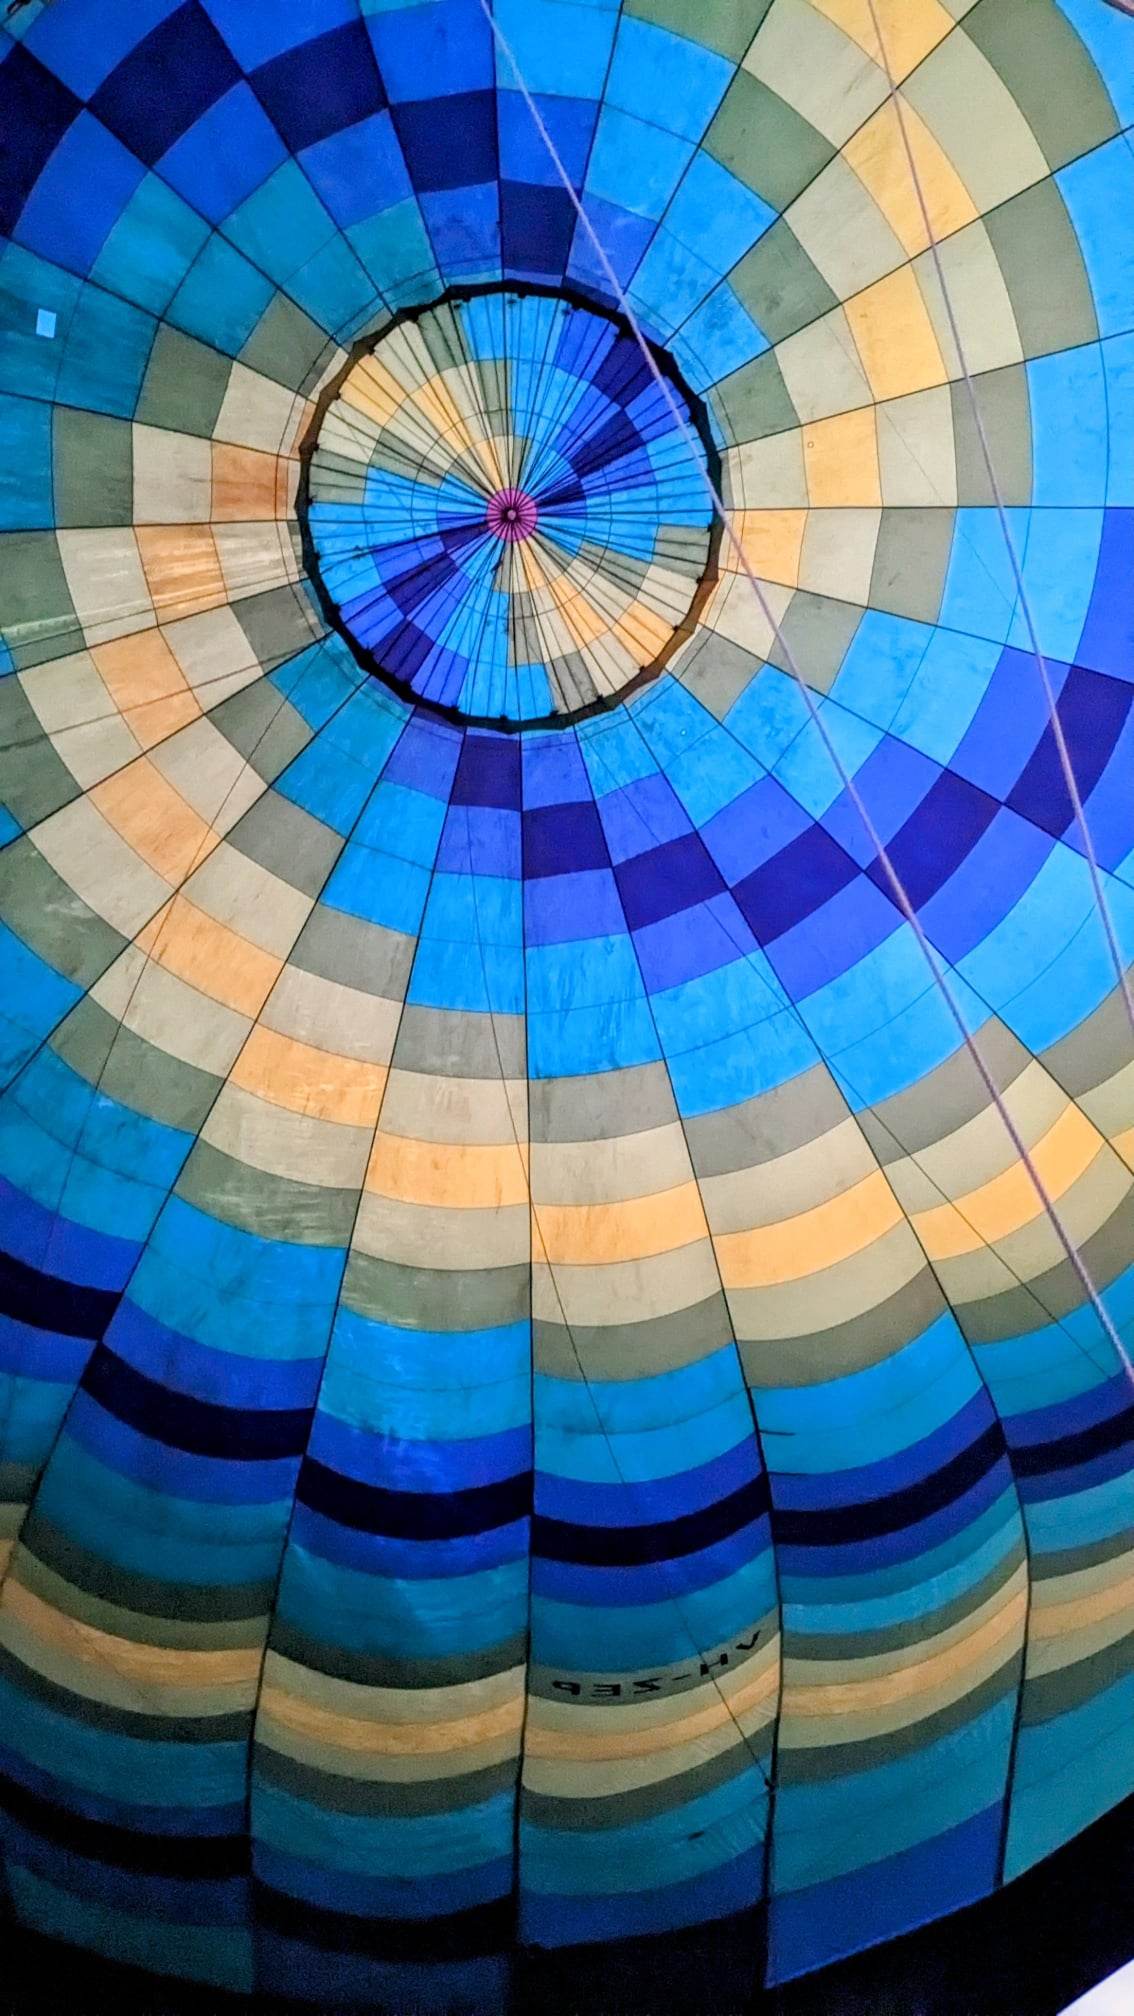 image of the inside of a hot air balloon